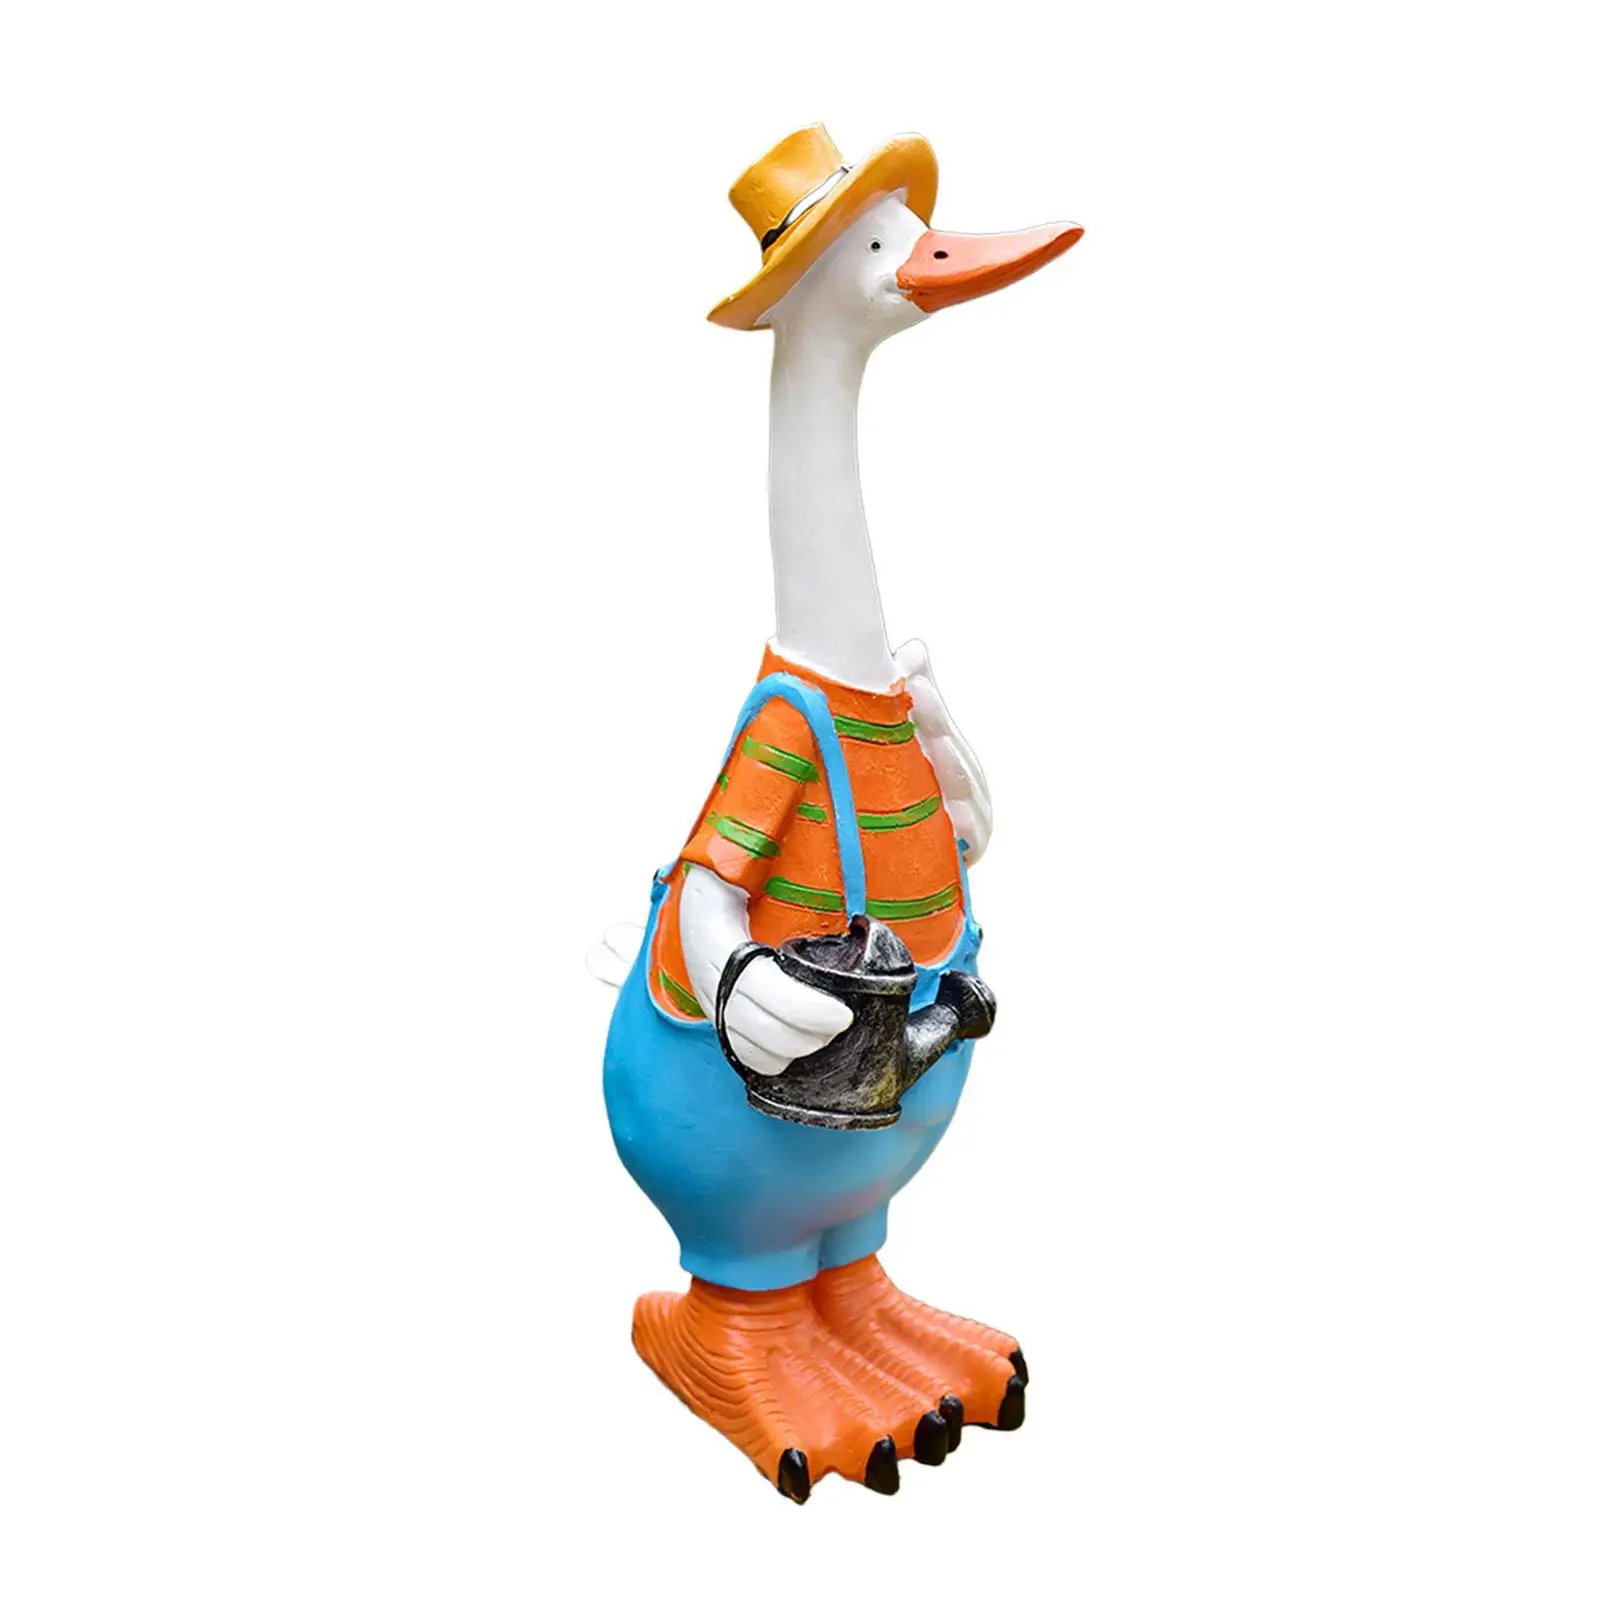 Resin Duck Statues Figurines Decoration Garden Duck Ornament for Patio Lawn